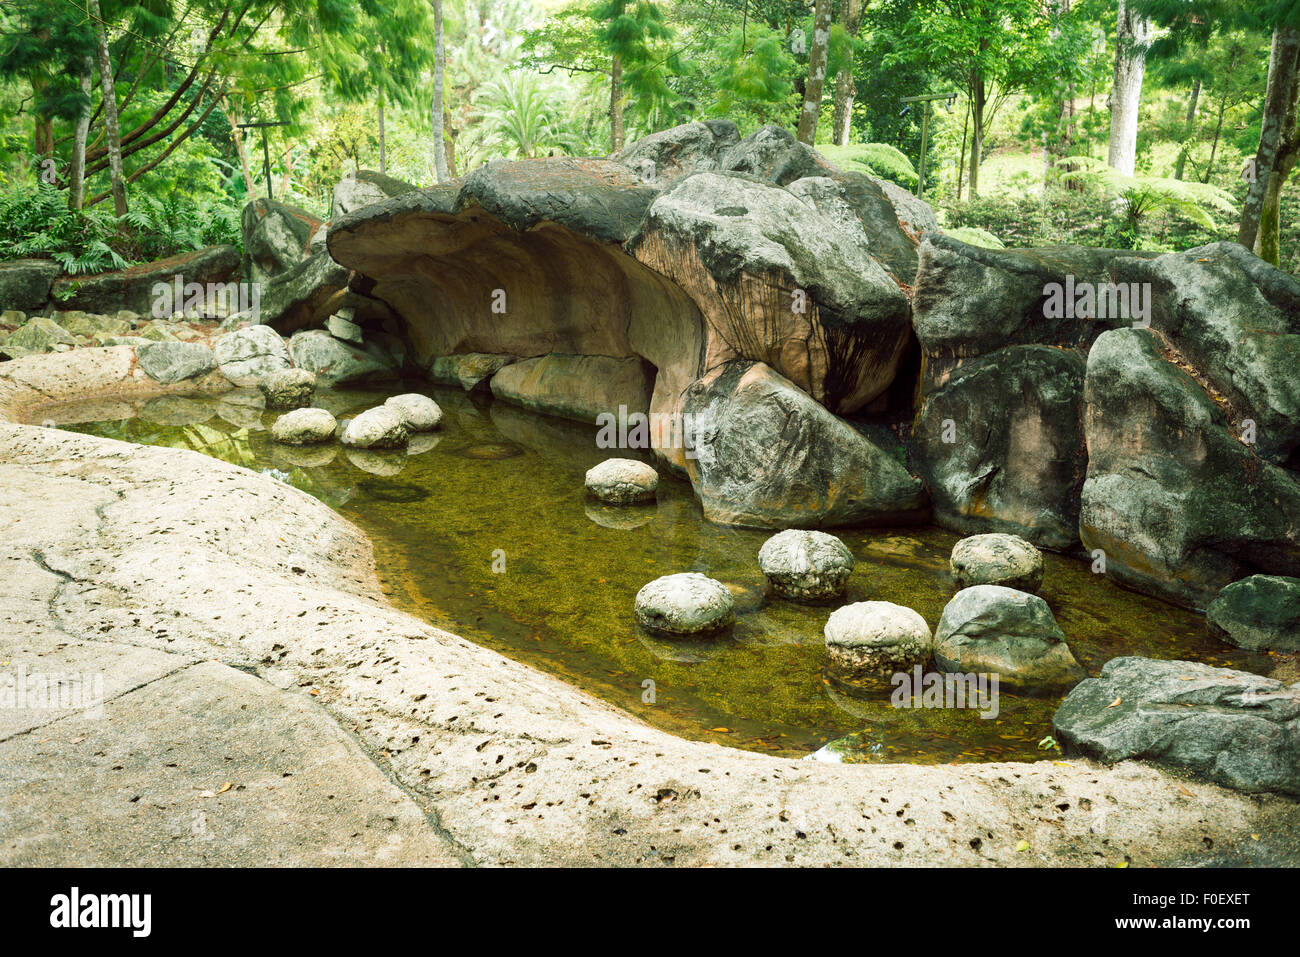 prehistoric landscape with scenic stone cliffs and caverns in Singapore Botanical garden Stock Photo